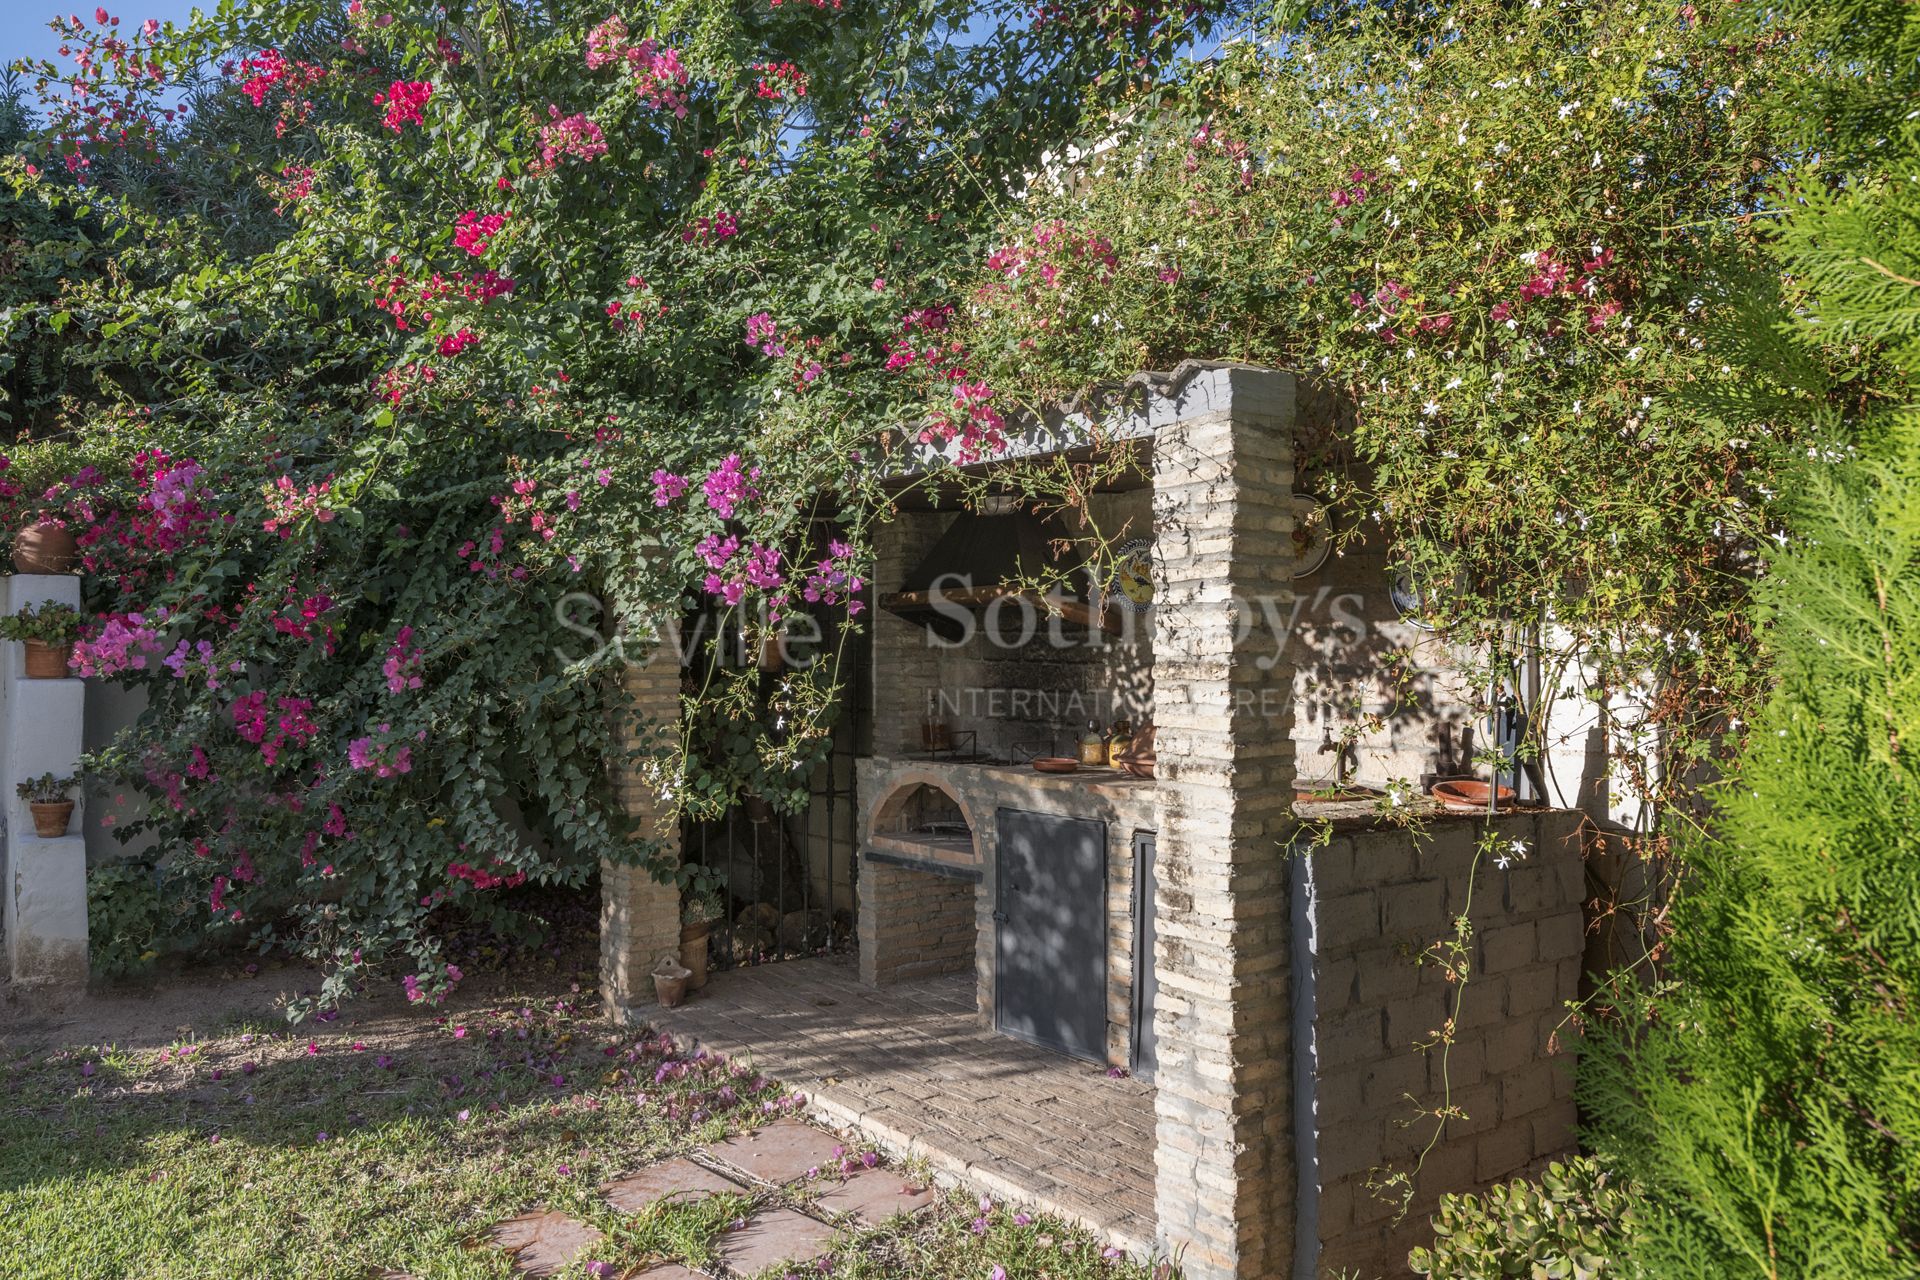 Detached villa with pool and large plot in the residential area of Los Cerros de Montequinto.